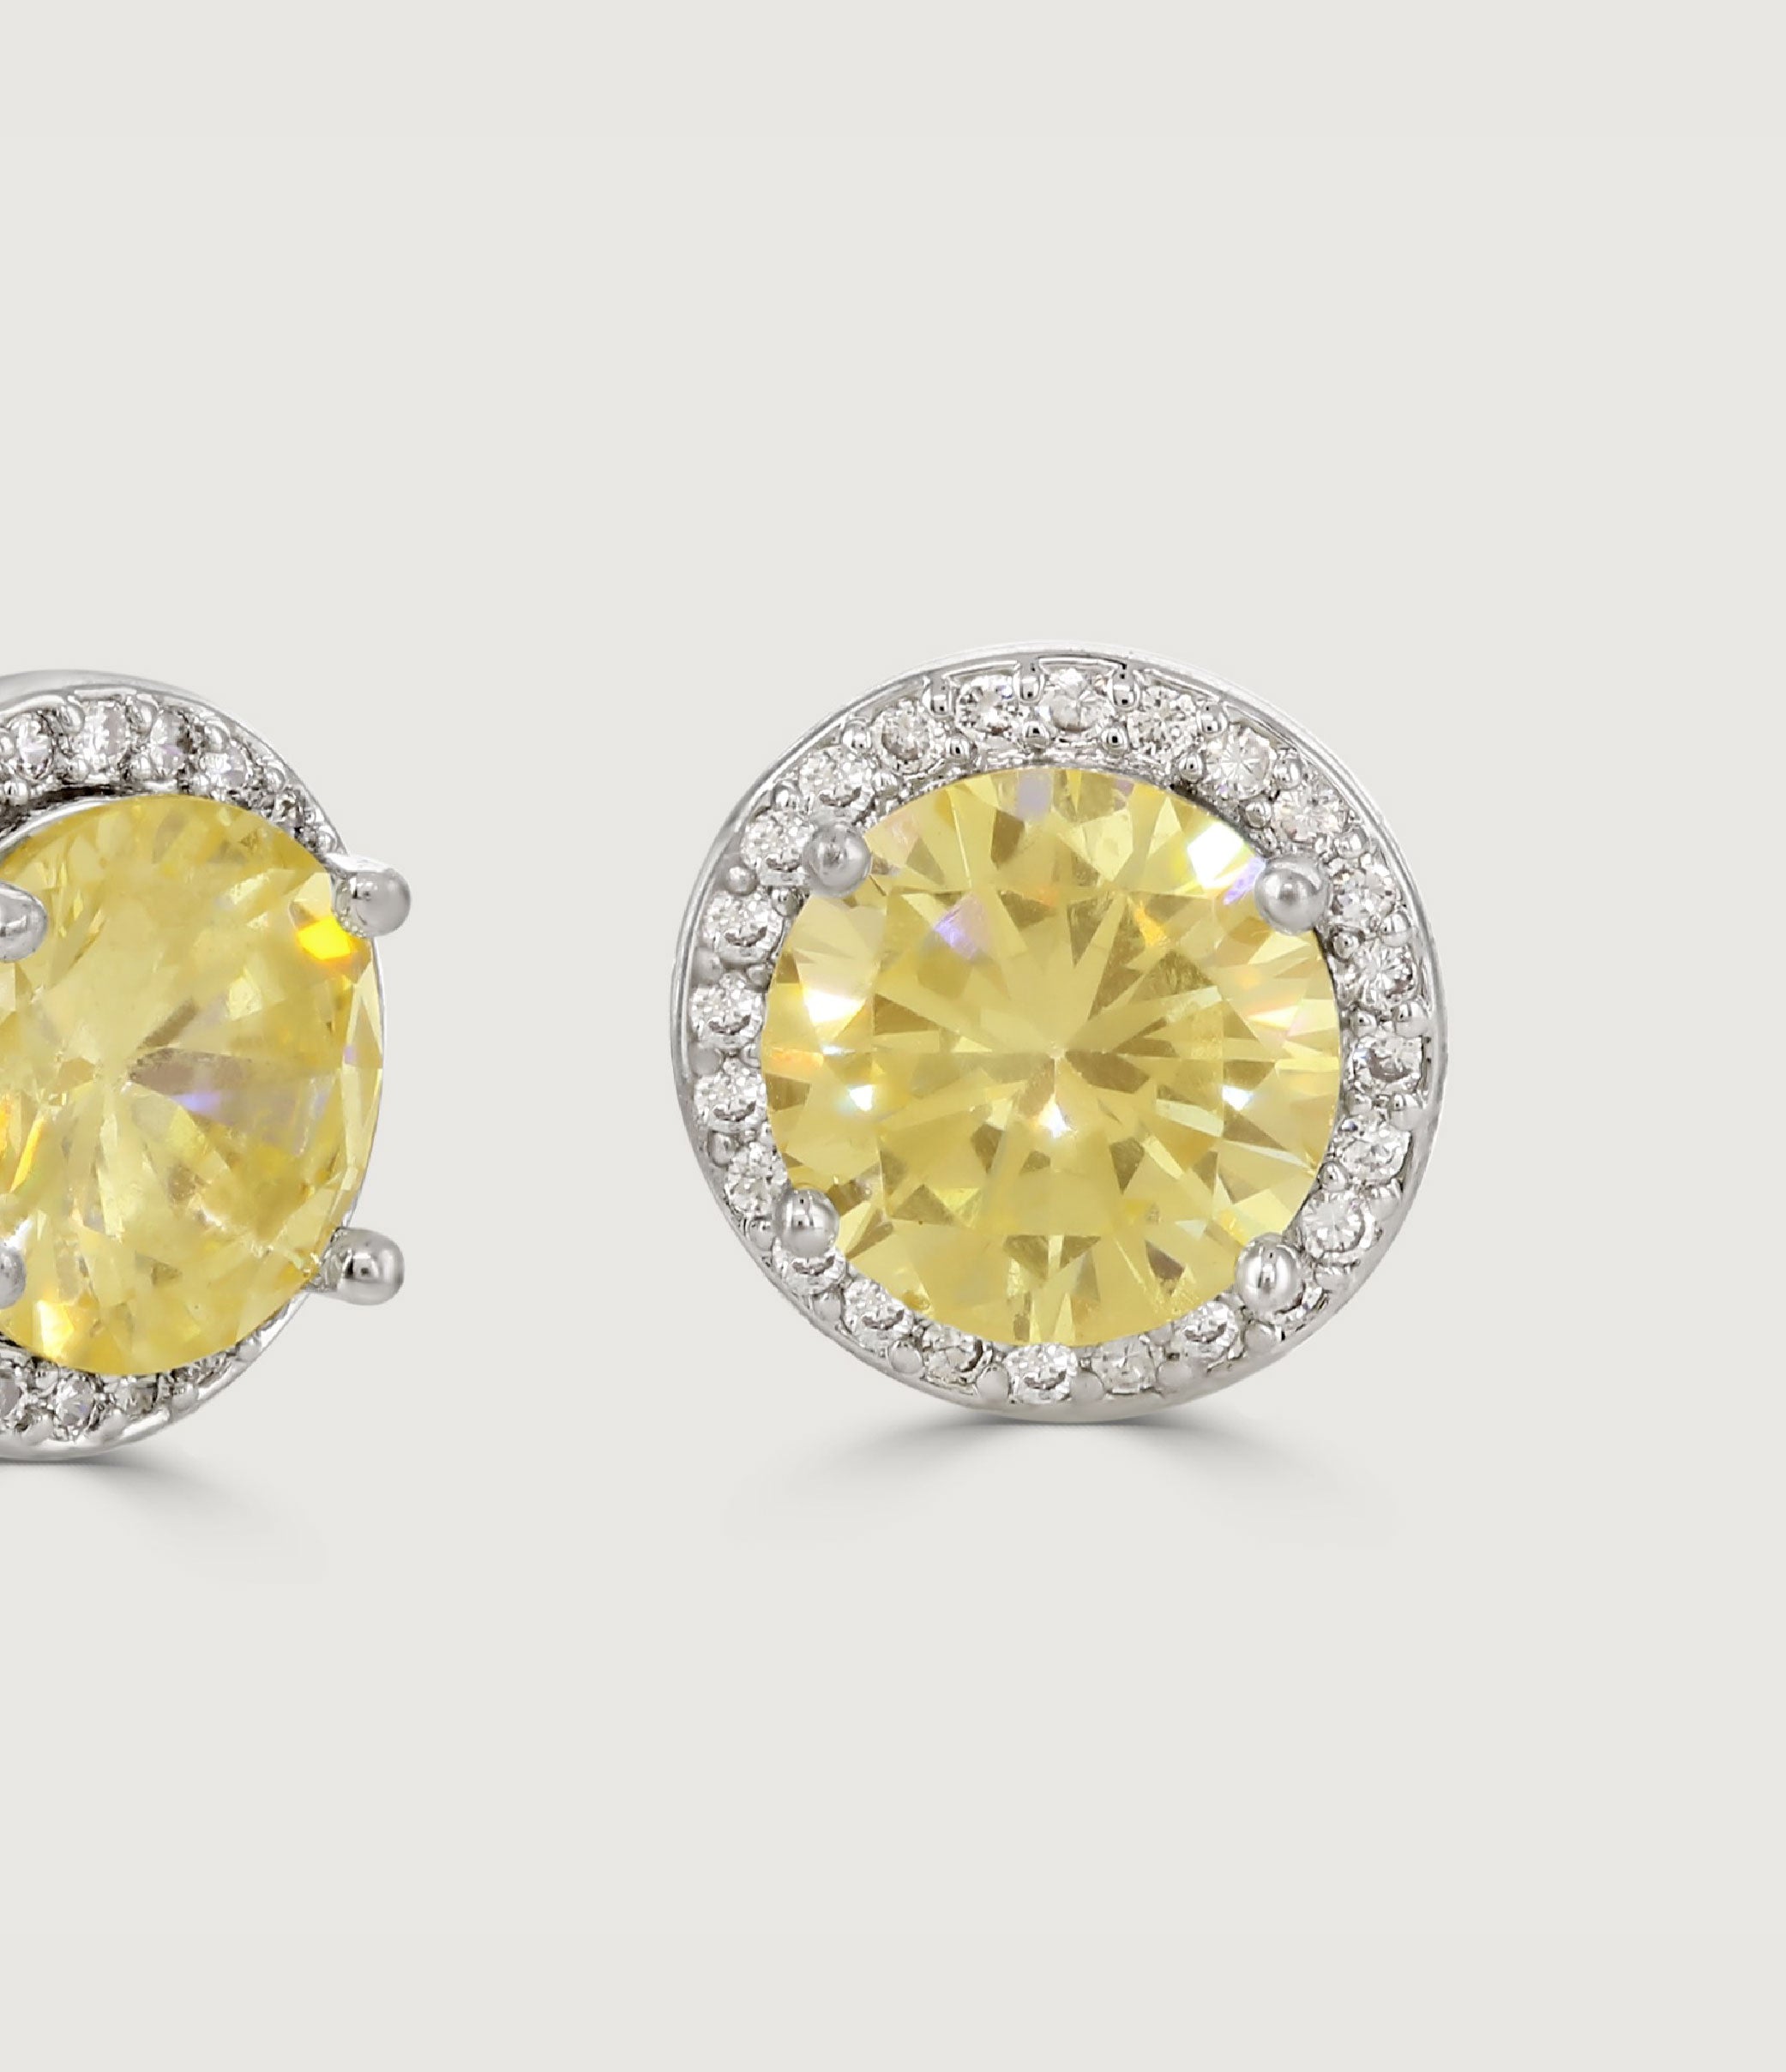 Canary Solitaire Earrings